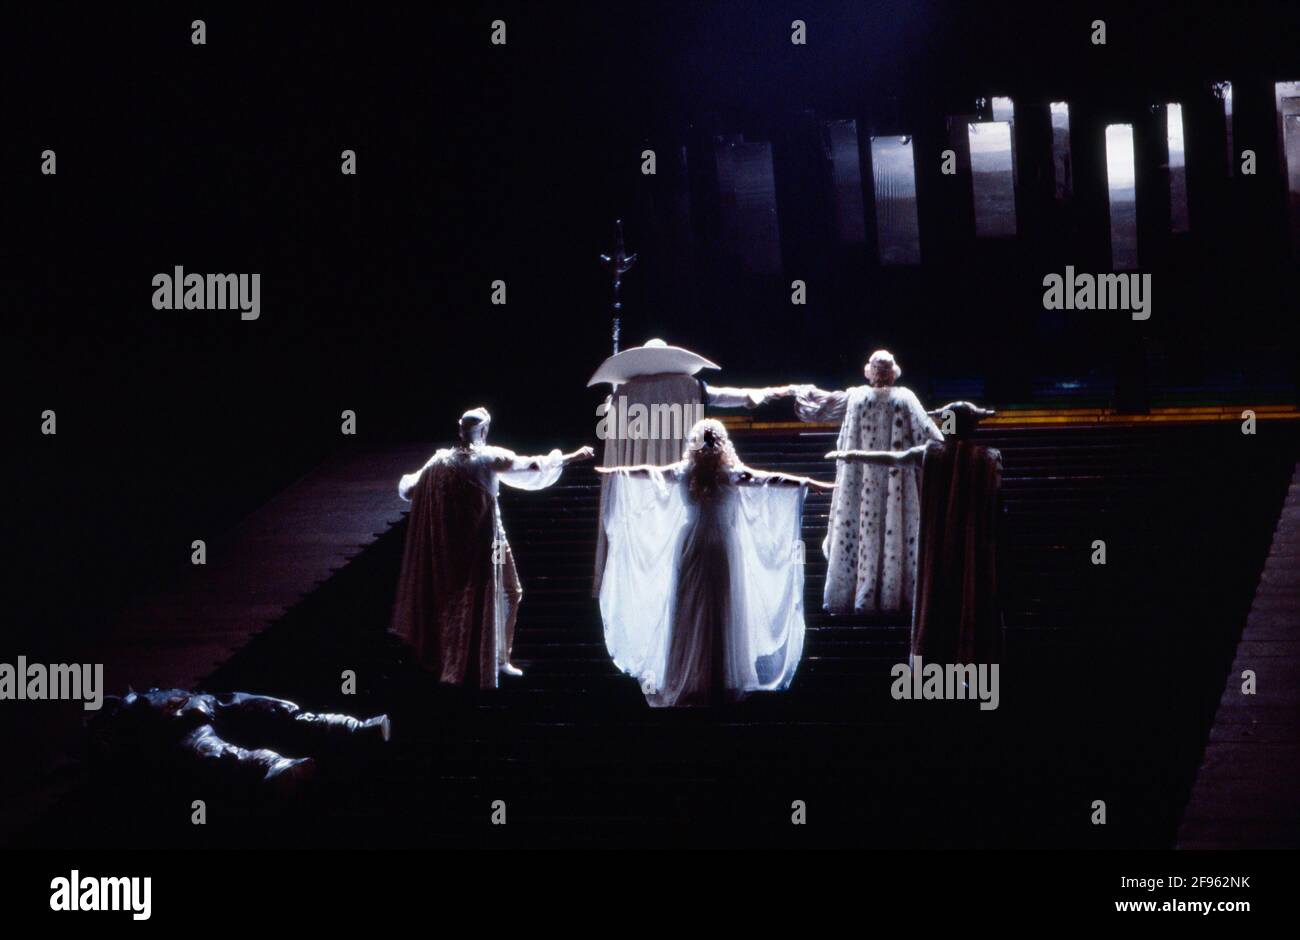 the Gods ascend to Valhalla in DAS RHEINGOLD by Wagner at the The Royal Opera, Covent Garden, London WC2  11/09/1980  conductor: Colin Davis  set design: Josef Svoboda  costumes: Ingrid Rosell  lighting: William Bundy  director: Gotz Friedrich Stock Photo